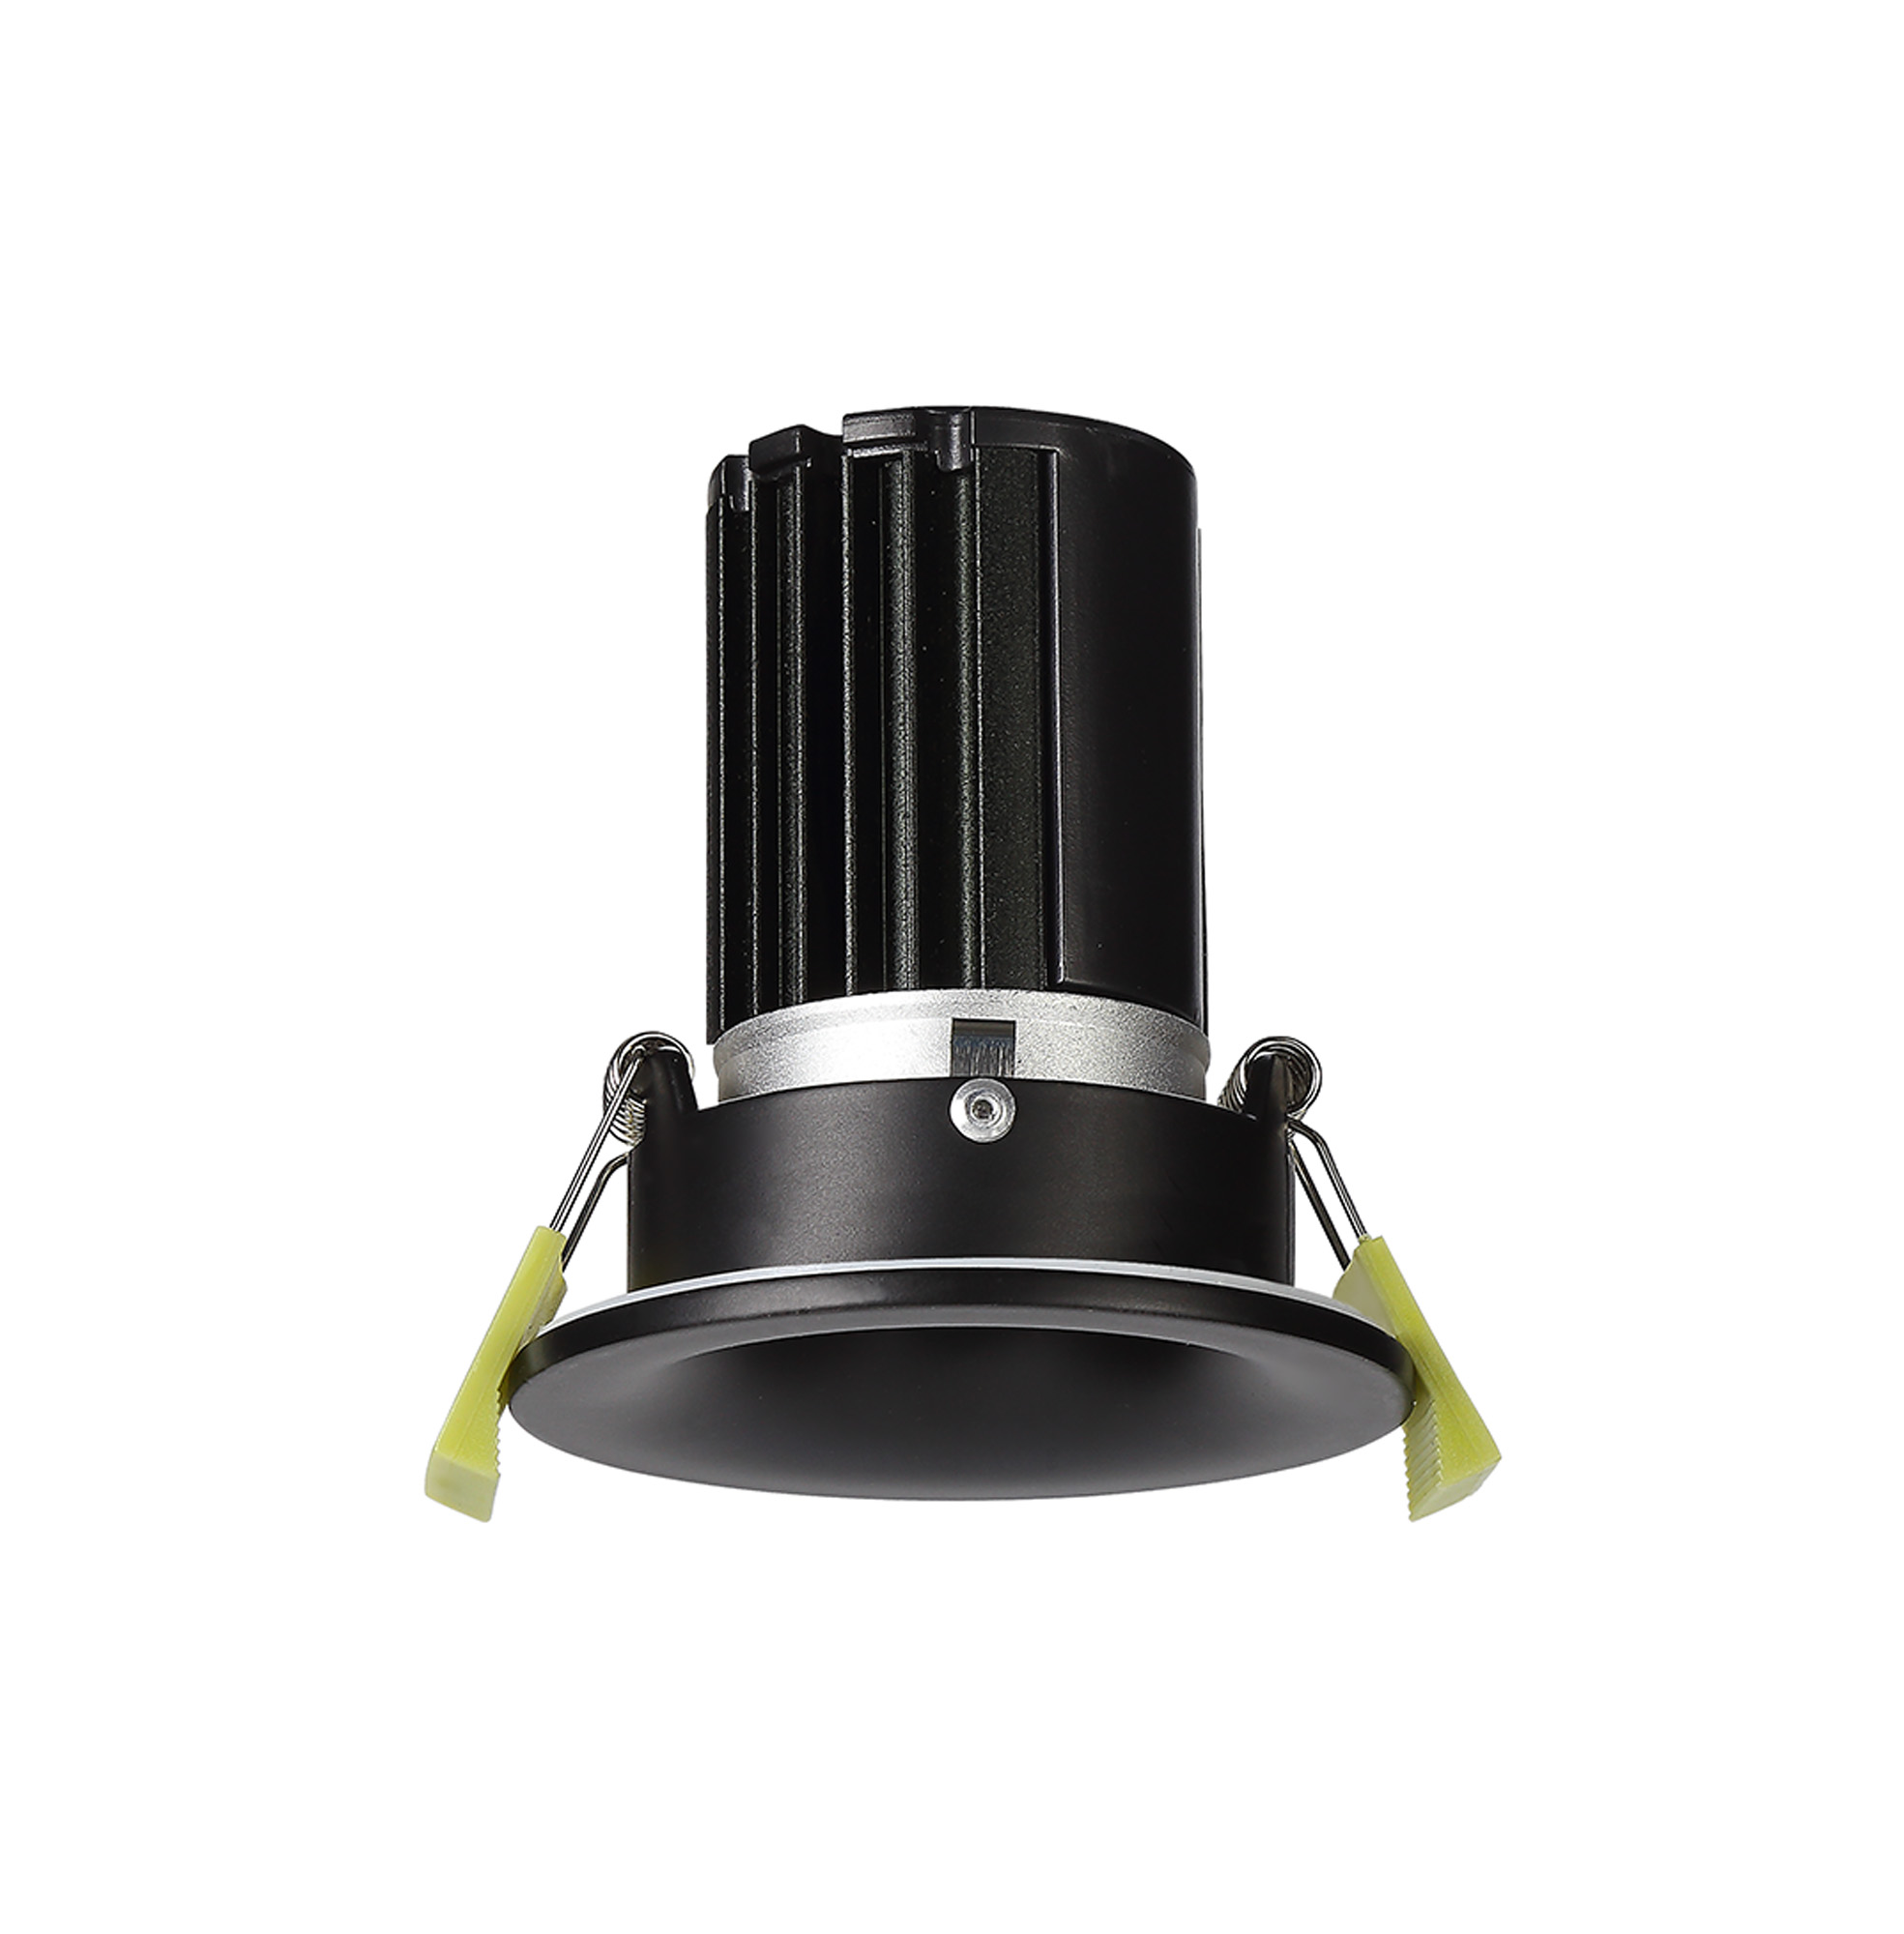 DM201462  Bruve 9 Tridonic powered 9W 2700K 700lm 24° LED Engine;250mA ; CRI>90 LED Engine Matt Black Fixed Round Recessed Downlight; Inner Glass cover; IP65